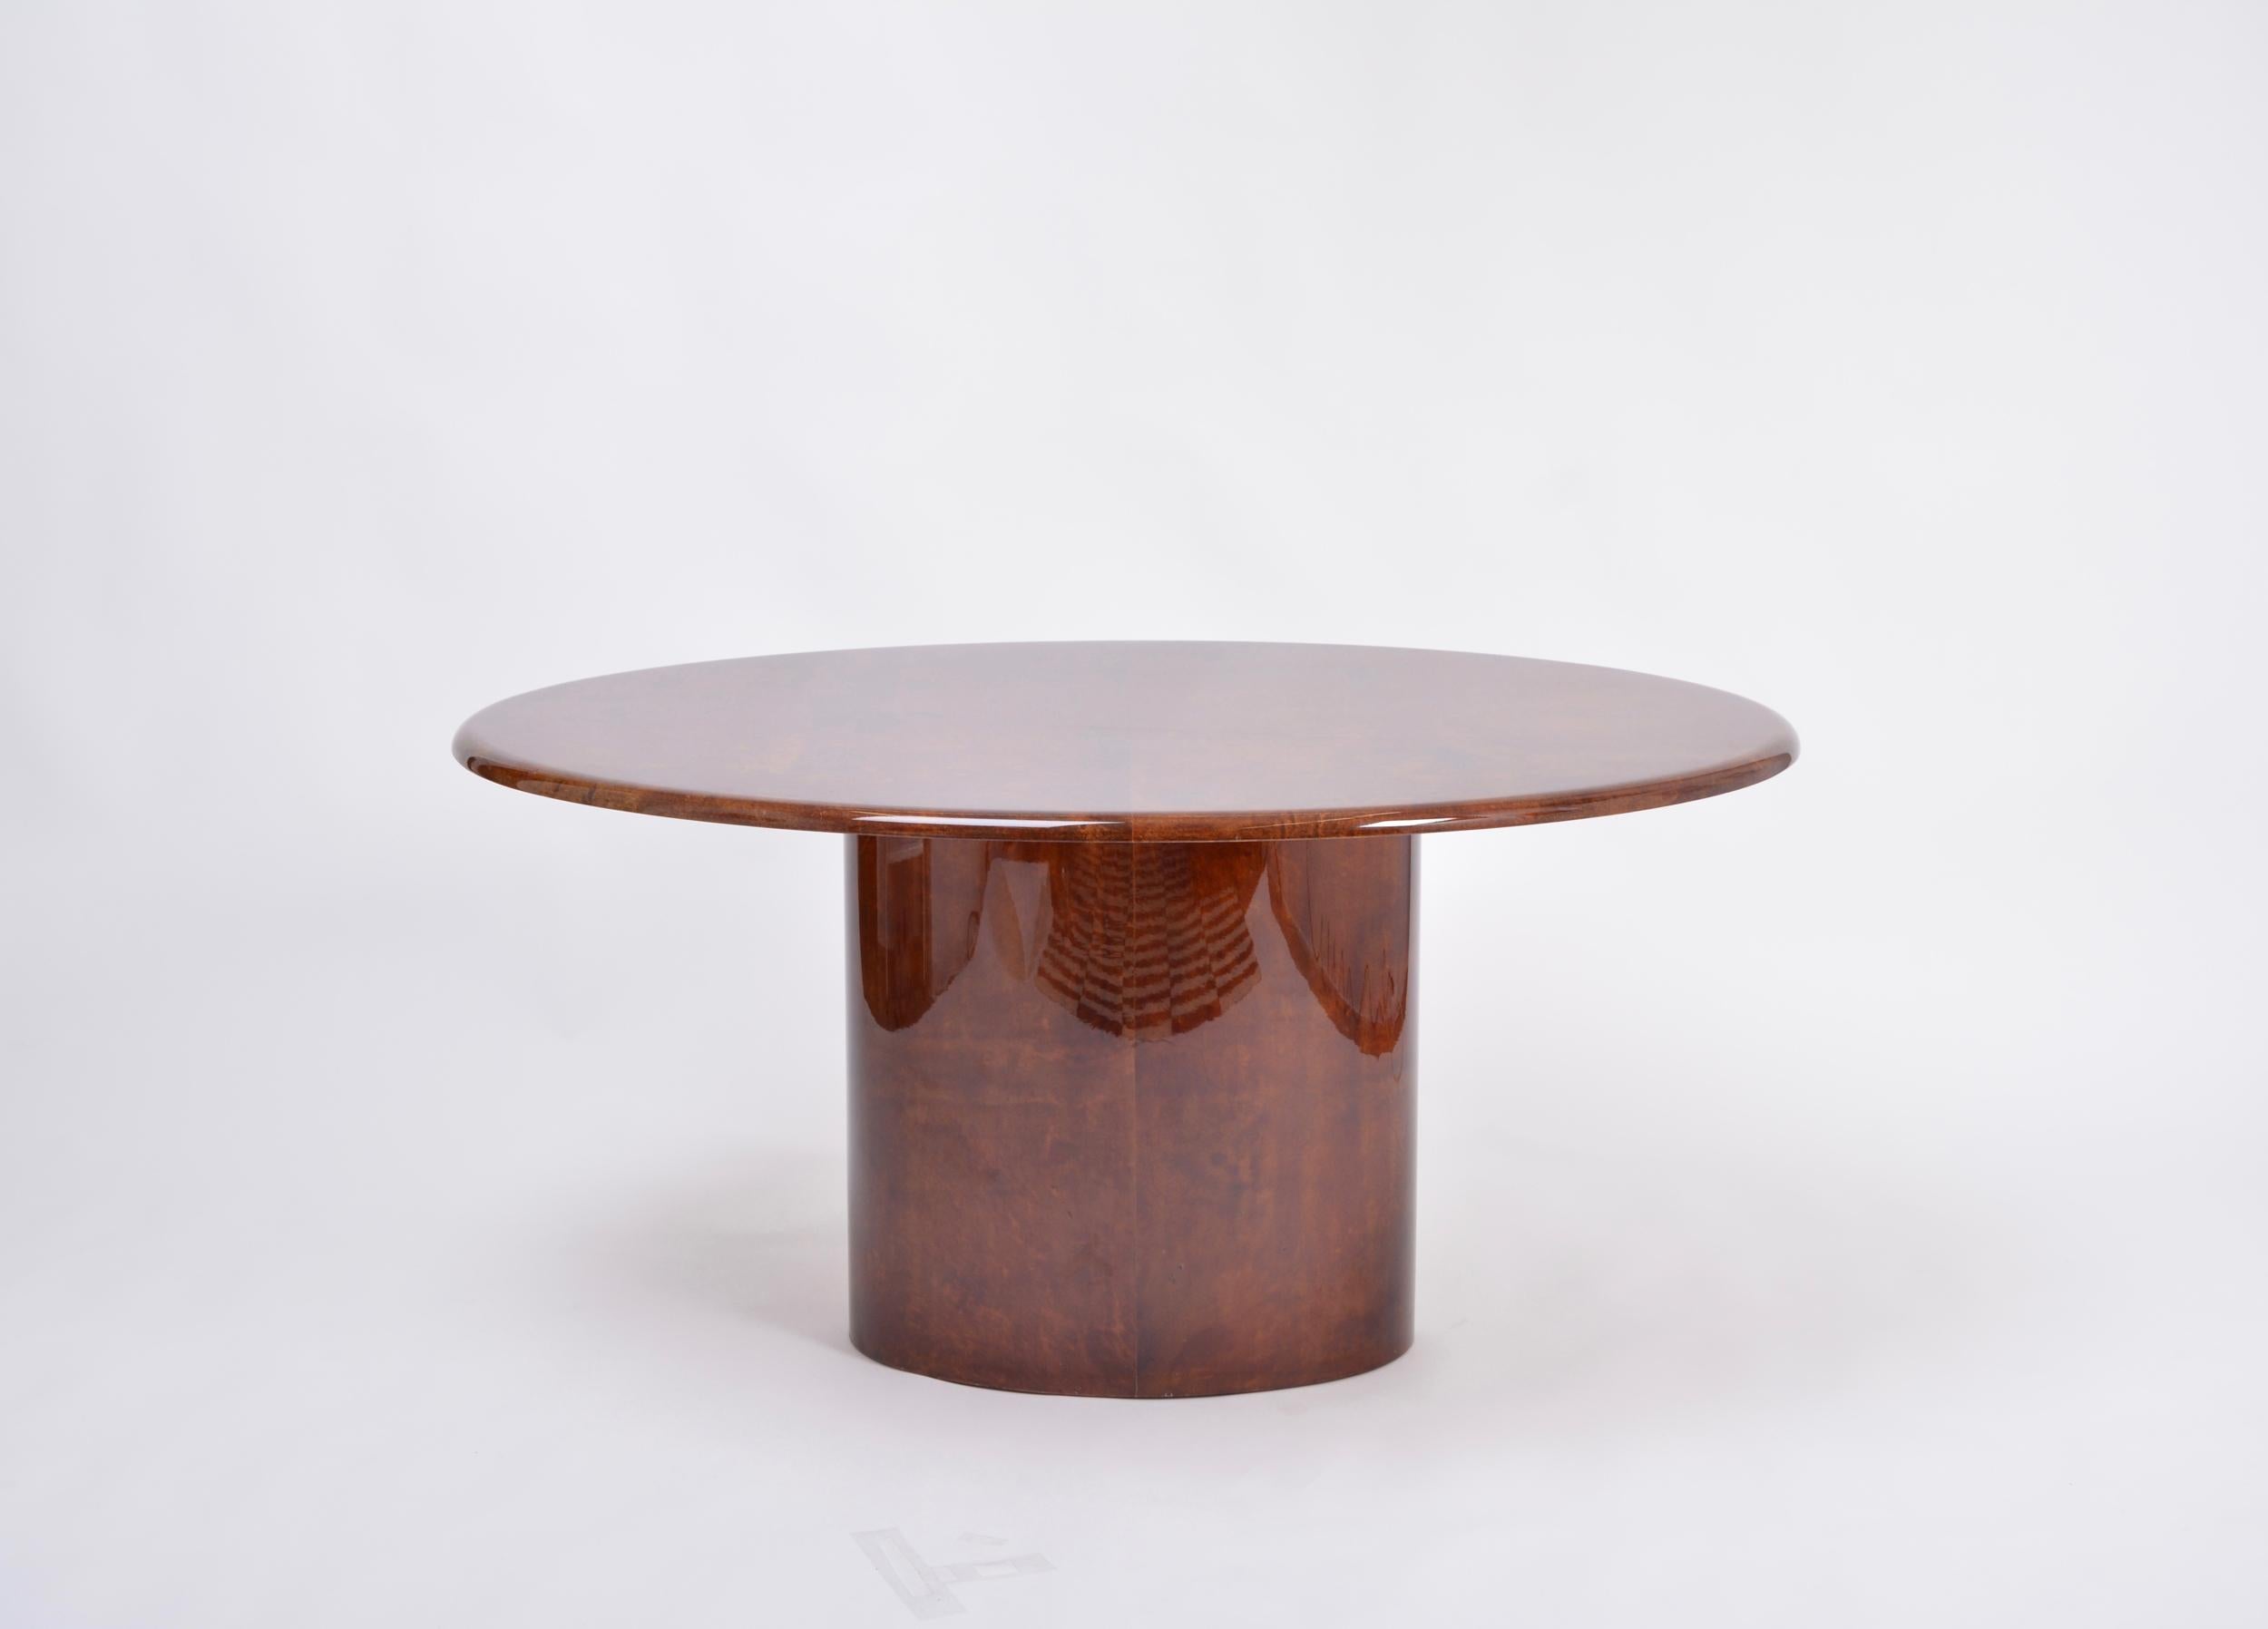 Elliptically shaped dining table designed by Aldo Tura and produced in Italy in the 1970s. This dining table is a very strong example of his work, simple in form, with a soft curved top affixed to an elliptic pedestal base. The ethereal lacquered